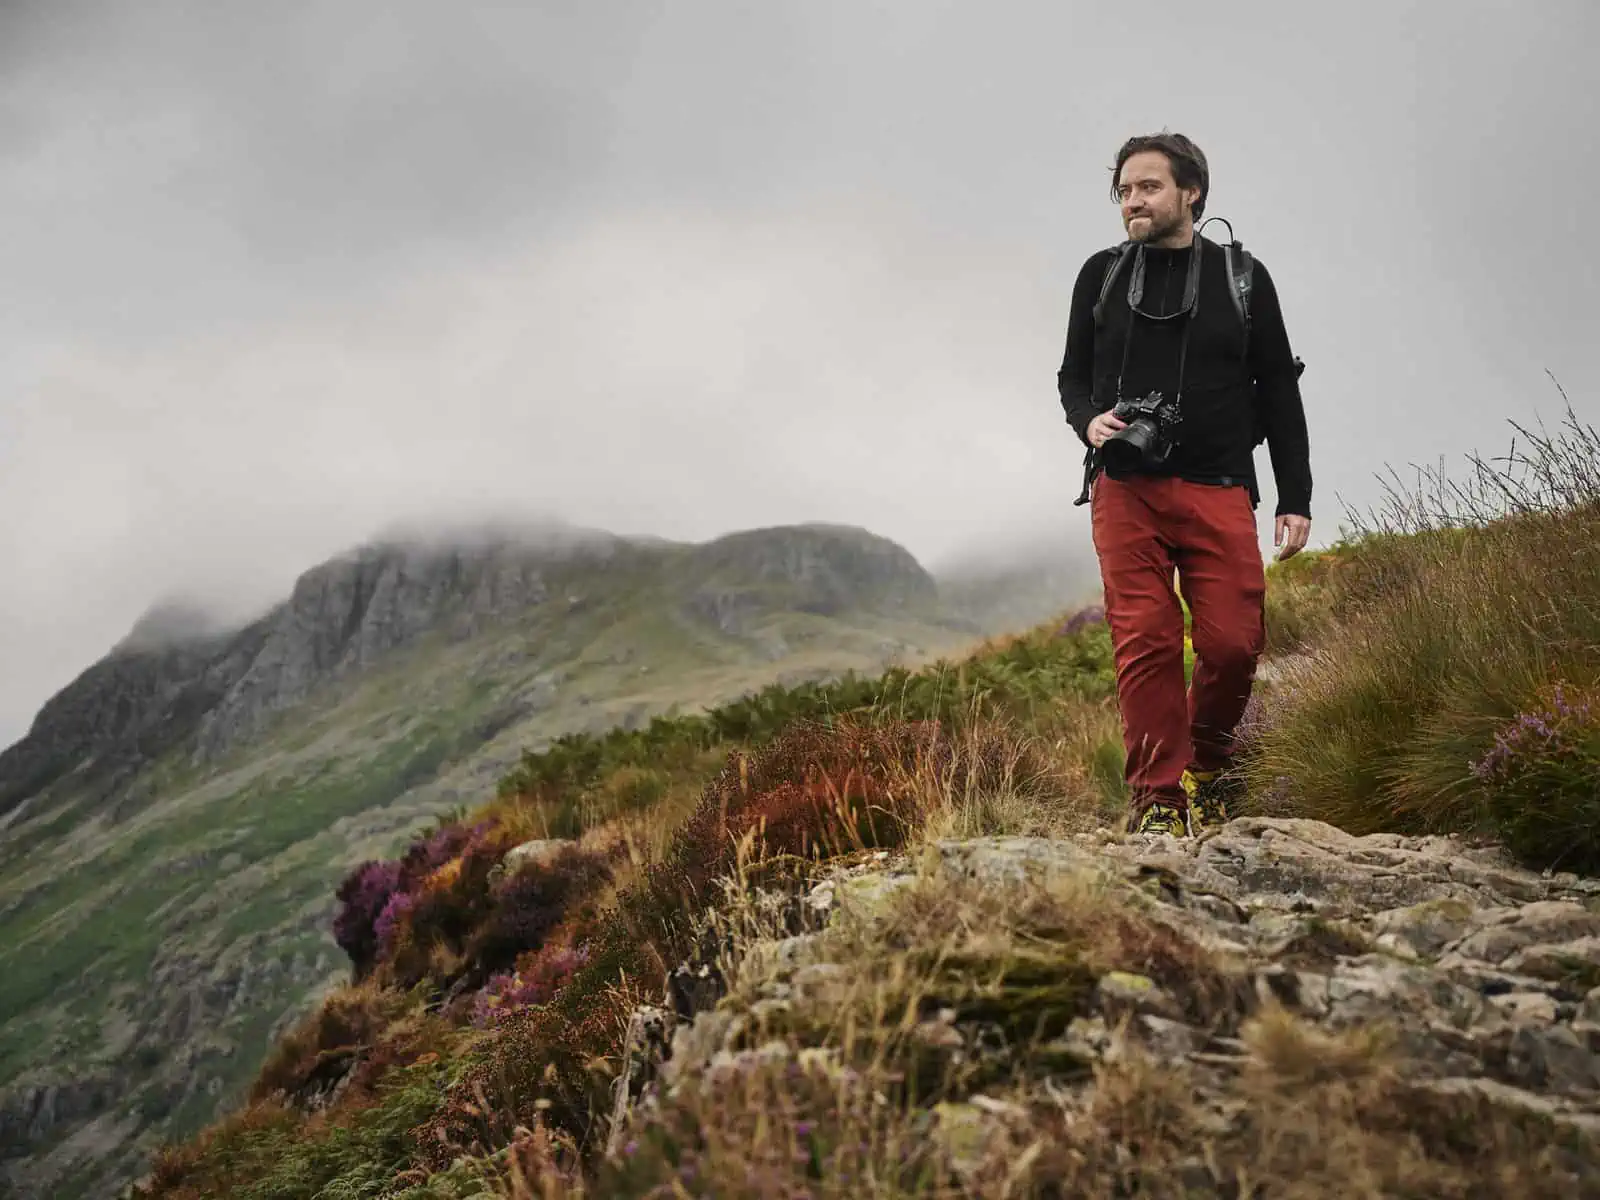 ID: A landscape image. Matt stands to the right of the frame on a rocky high up path. He is wearing a black top and red trousers and has a camera around his neck. There are purple wild flowers around him. In the background are mountains that are bei…